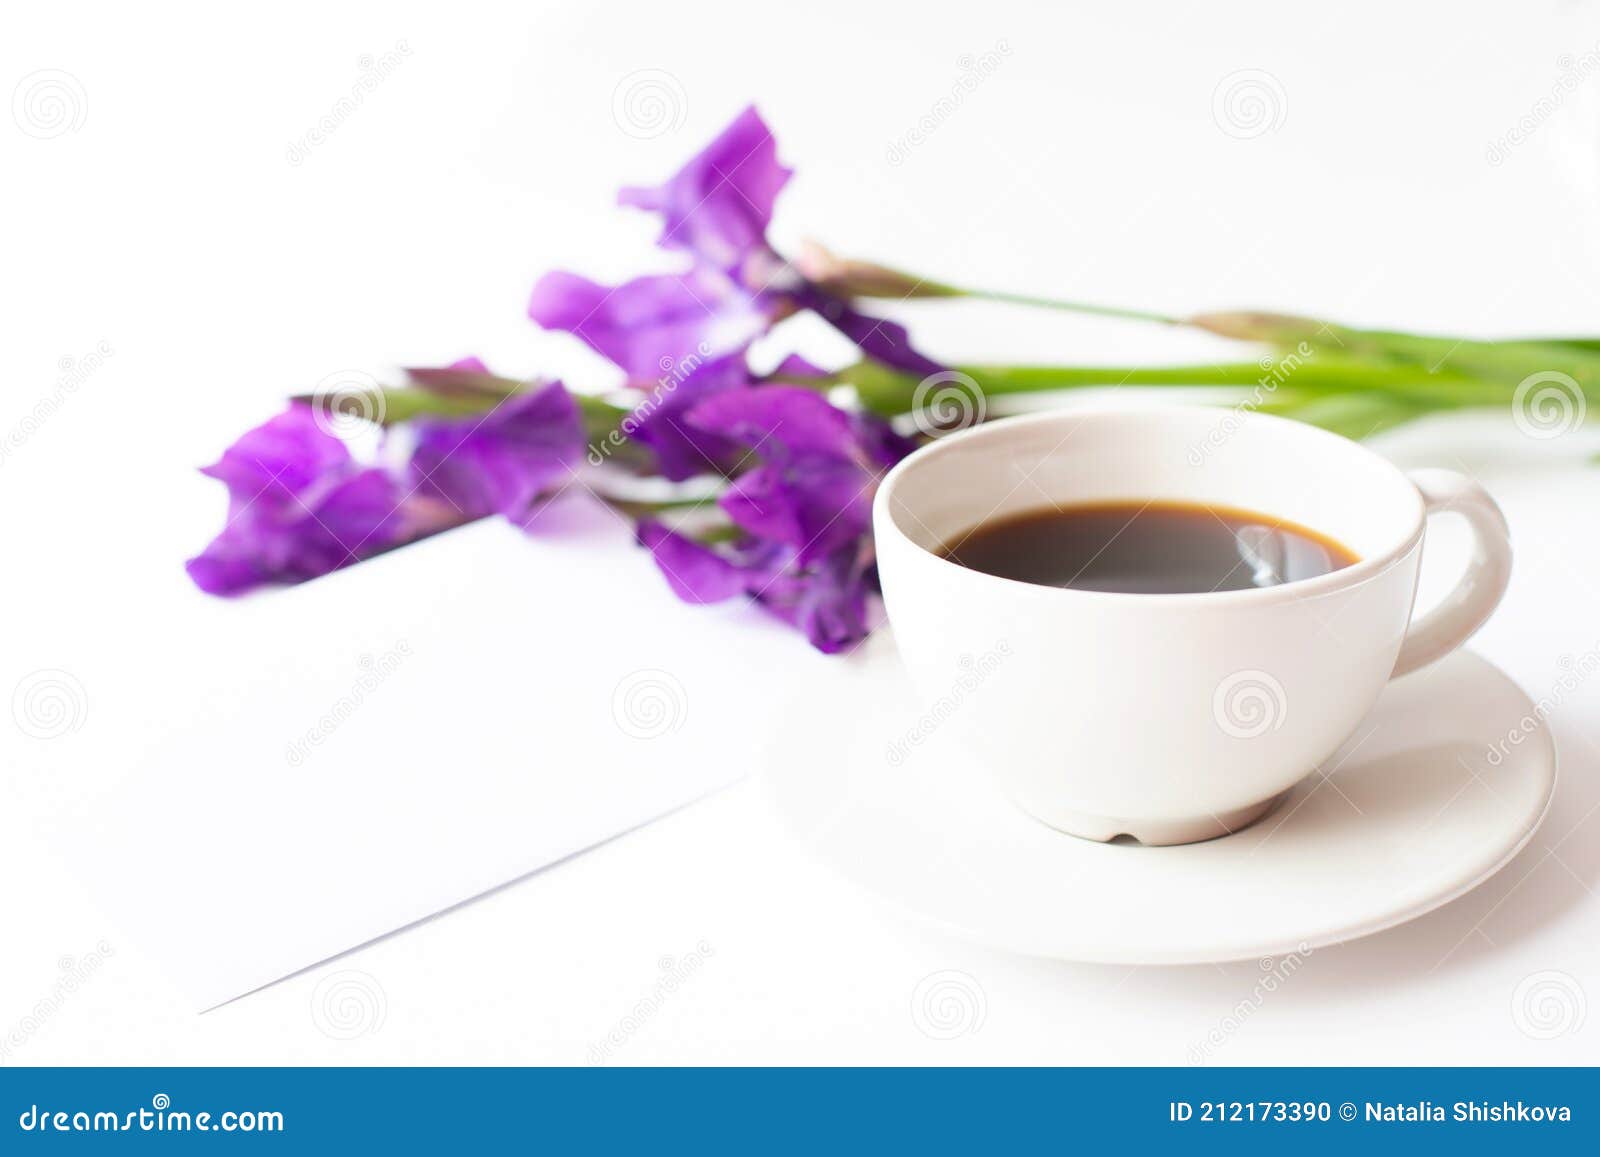 a cup with black coffee and a bouquet of iris flowers are on a light background.